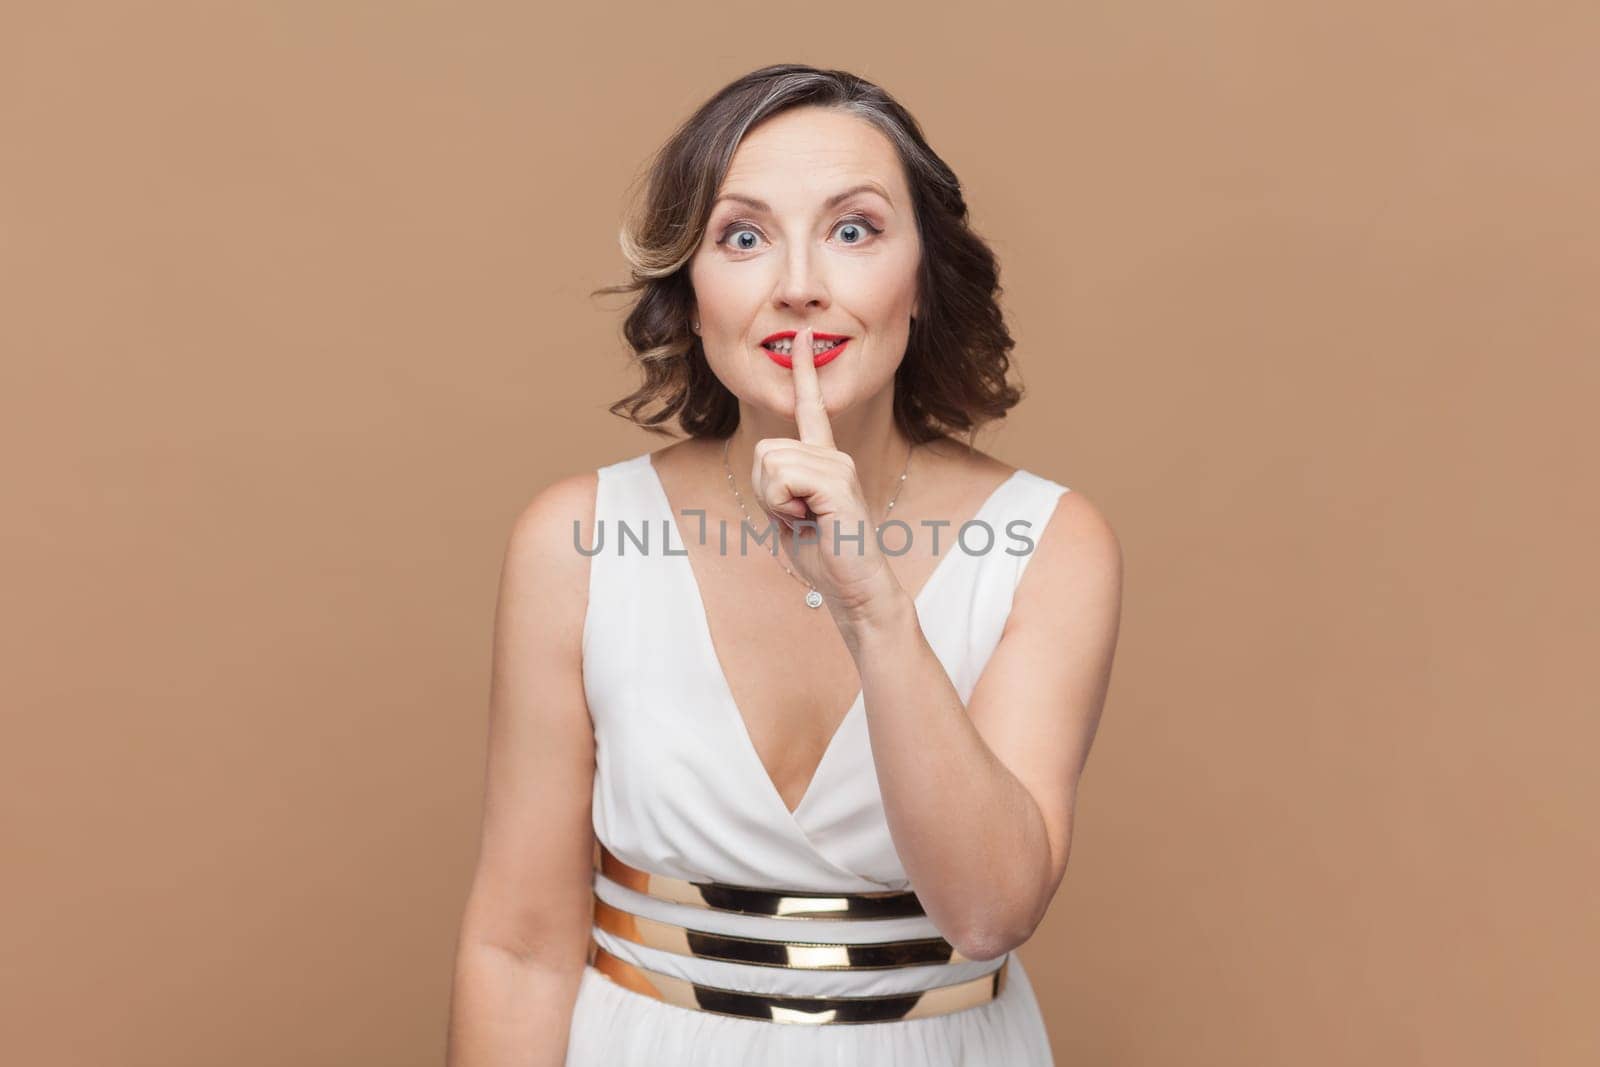 Portrait of woman makes silence or hush gesture, keeps index fingers over lips, tells secret information to someone, wearing white dress. Indoor studio shot isolated on light brown background.